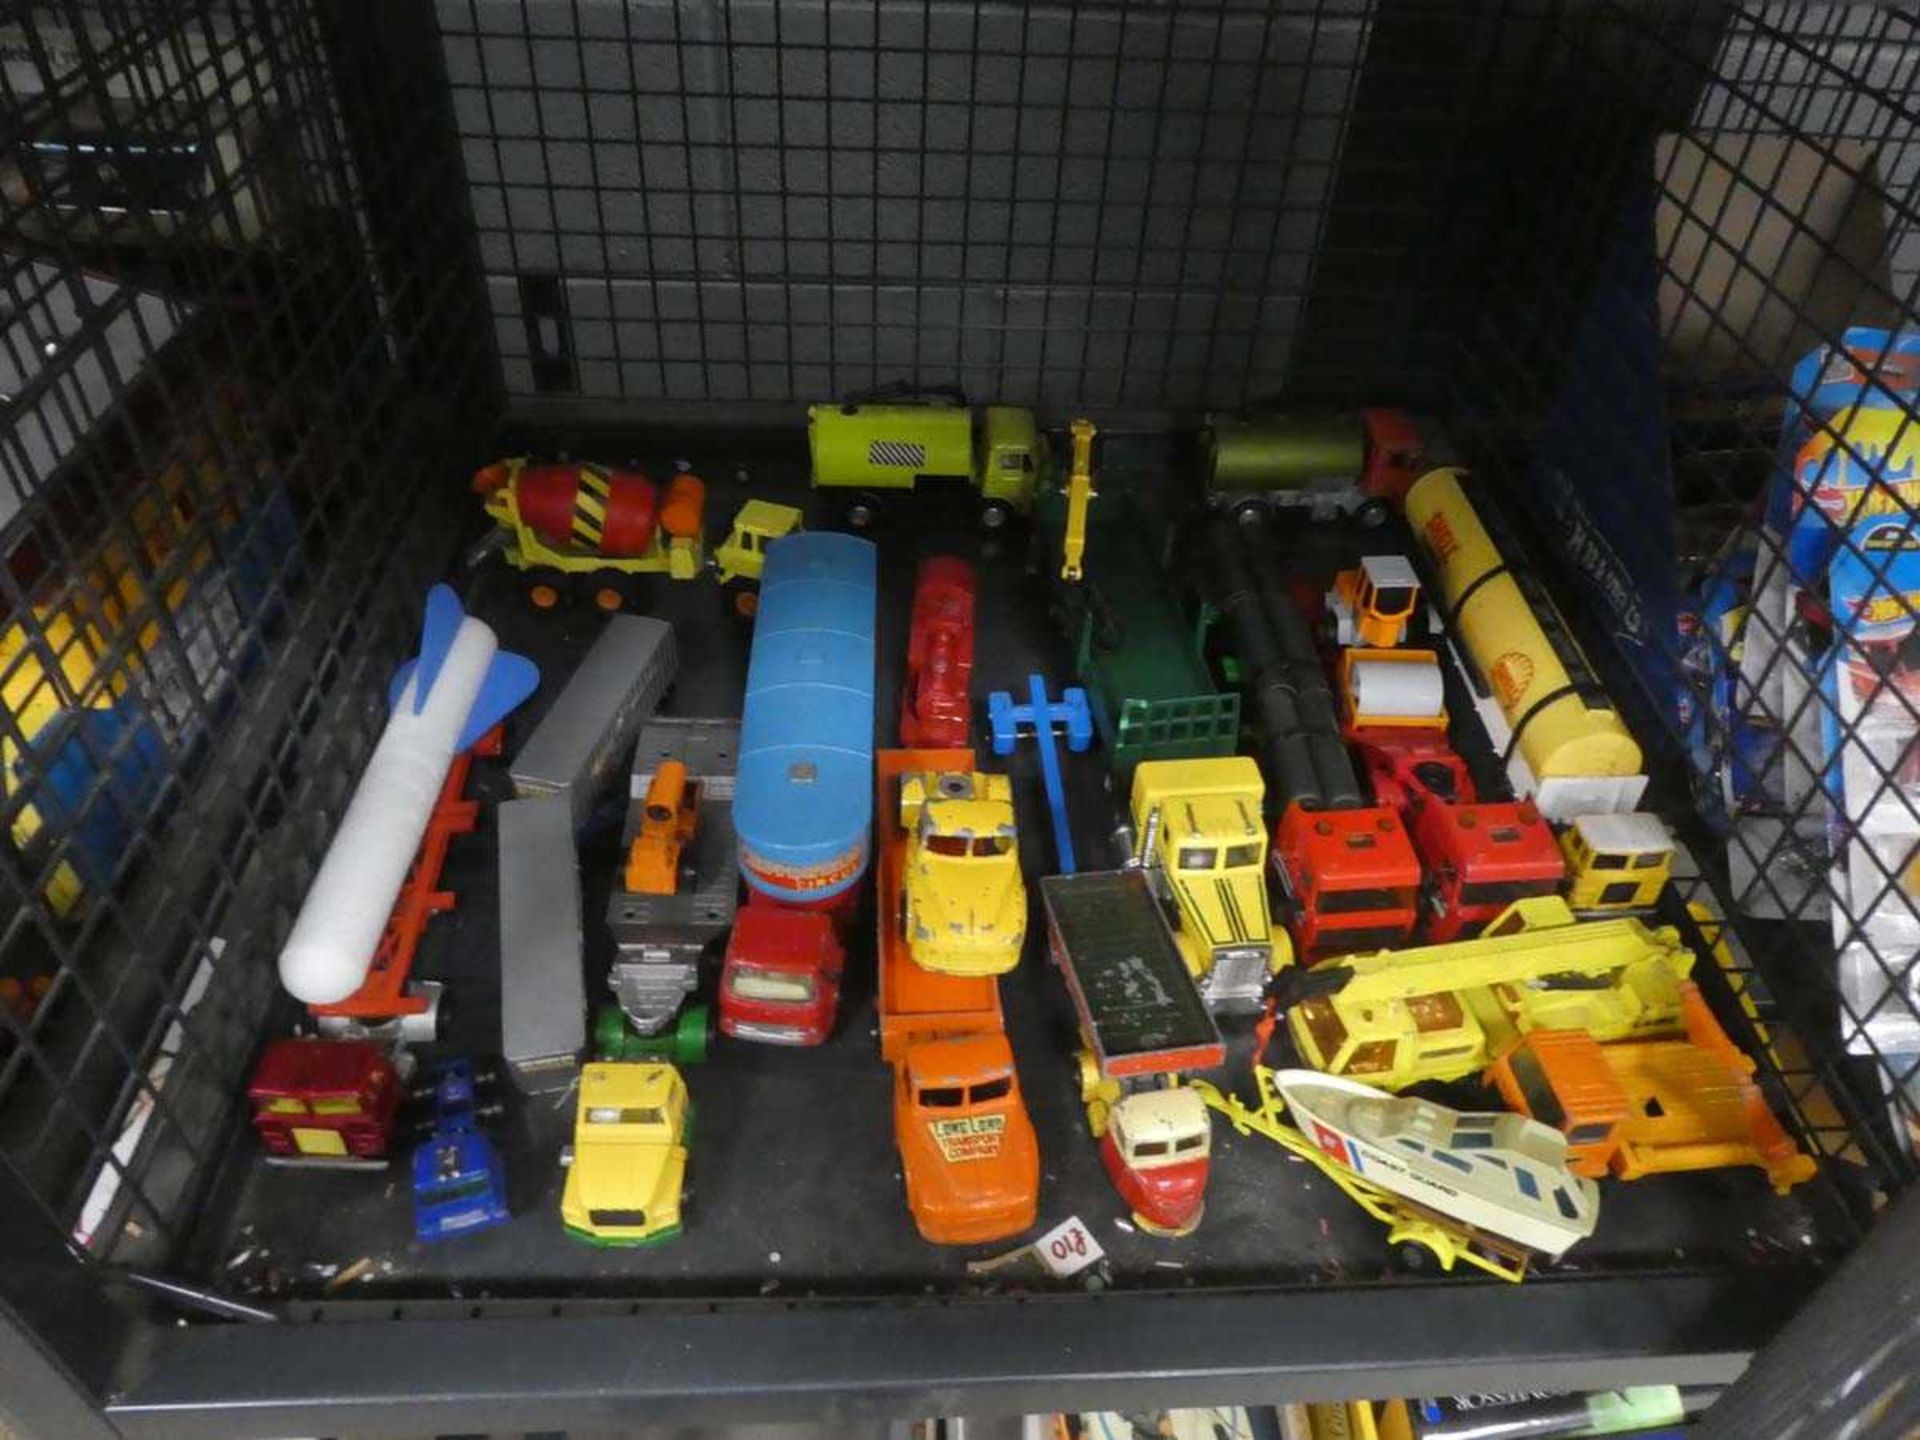 Cage containing playworn die cast vehicles